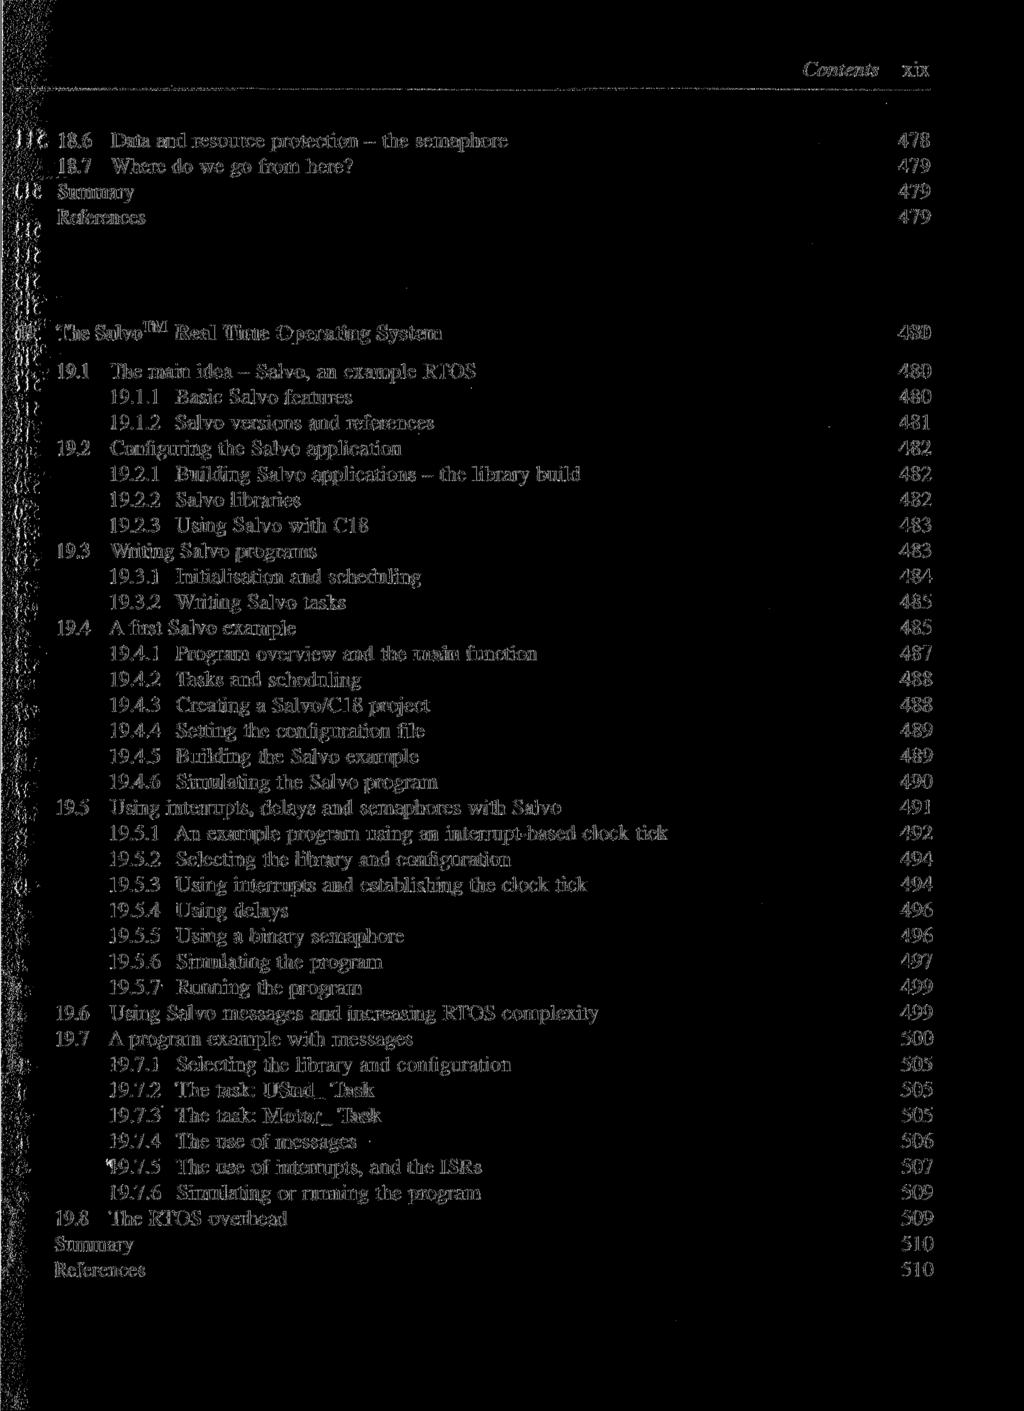 Contents xix 18.6 Data and resource protection - the semaphore 478 18.7 Where do we go from here? 479 Summary 479 References 479 19 The Salvo Real Time Operating System 480 19.